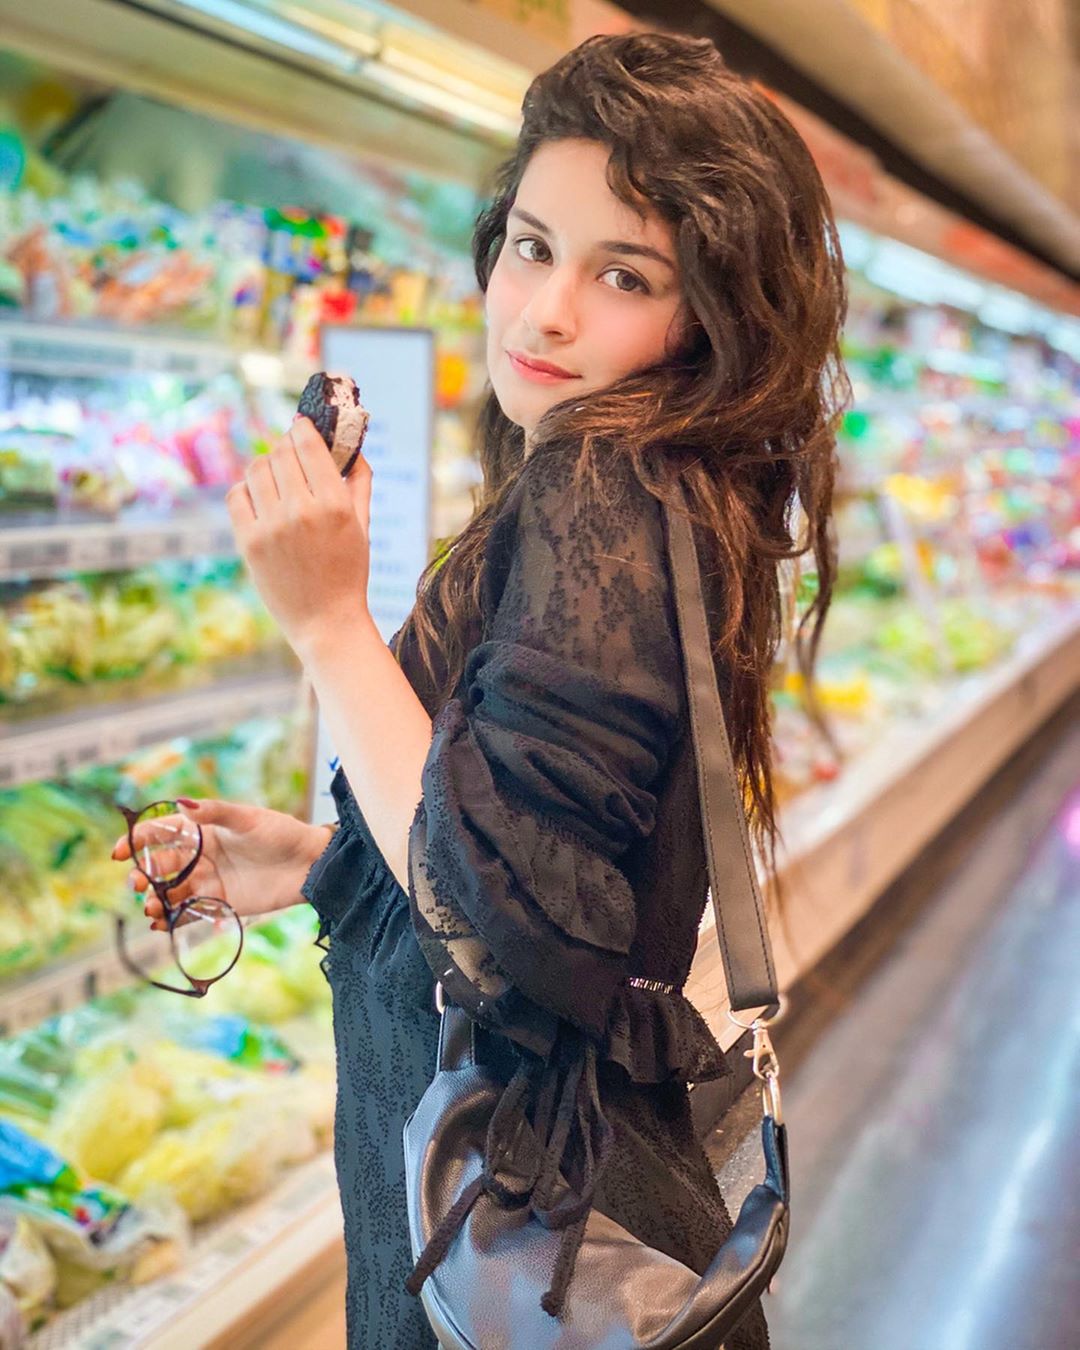 Avneet Kaur Wallpapers, Photos, Images & Pictures Grocery shopping is my kinda thing
What’s your shopping thing?
–  
Wearing-